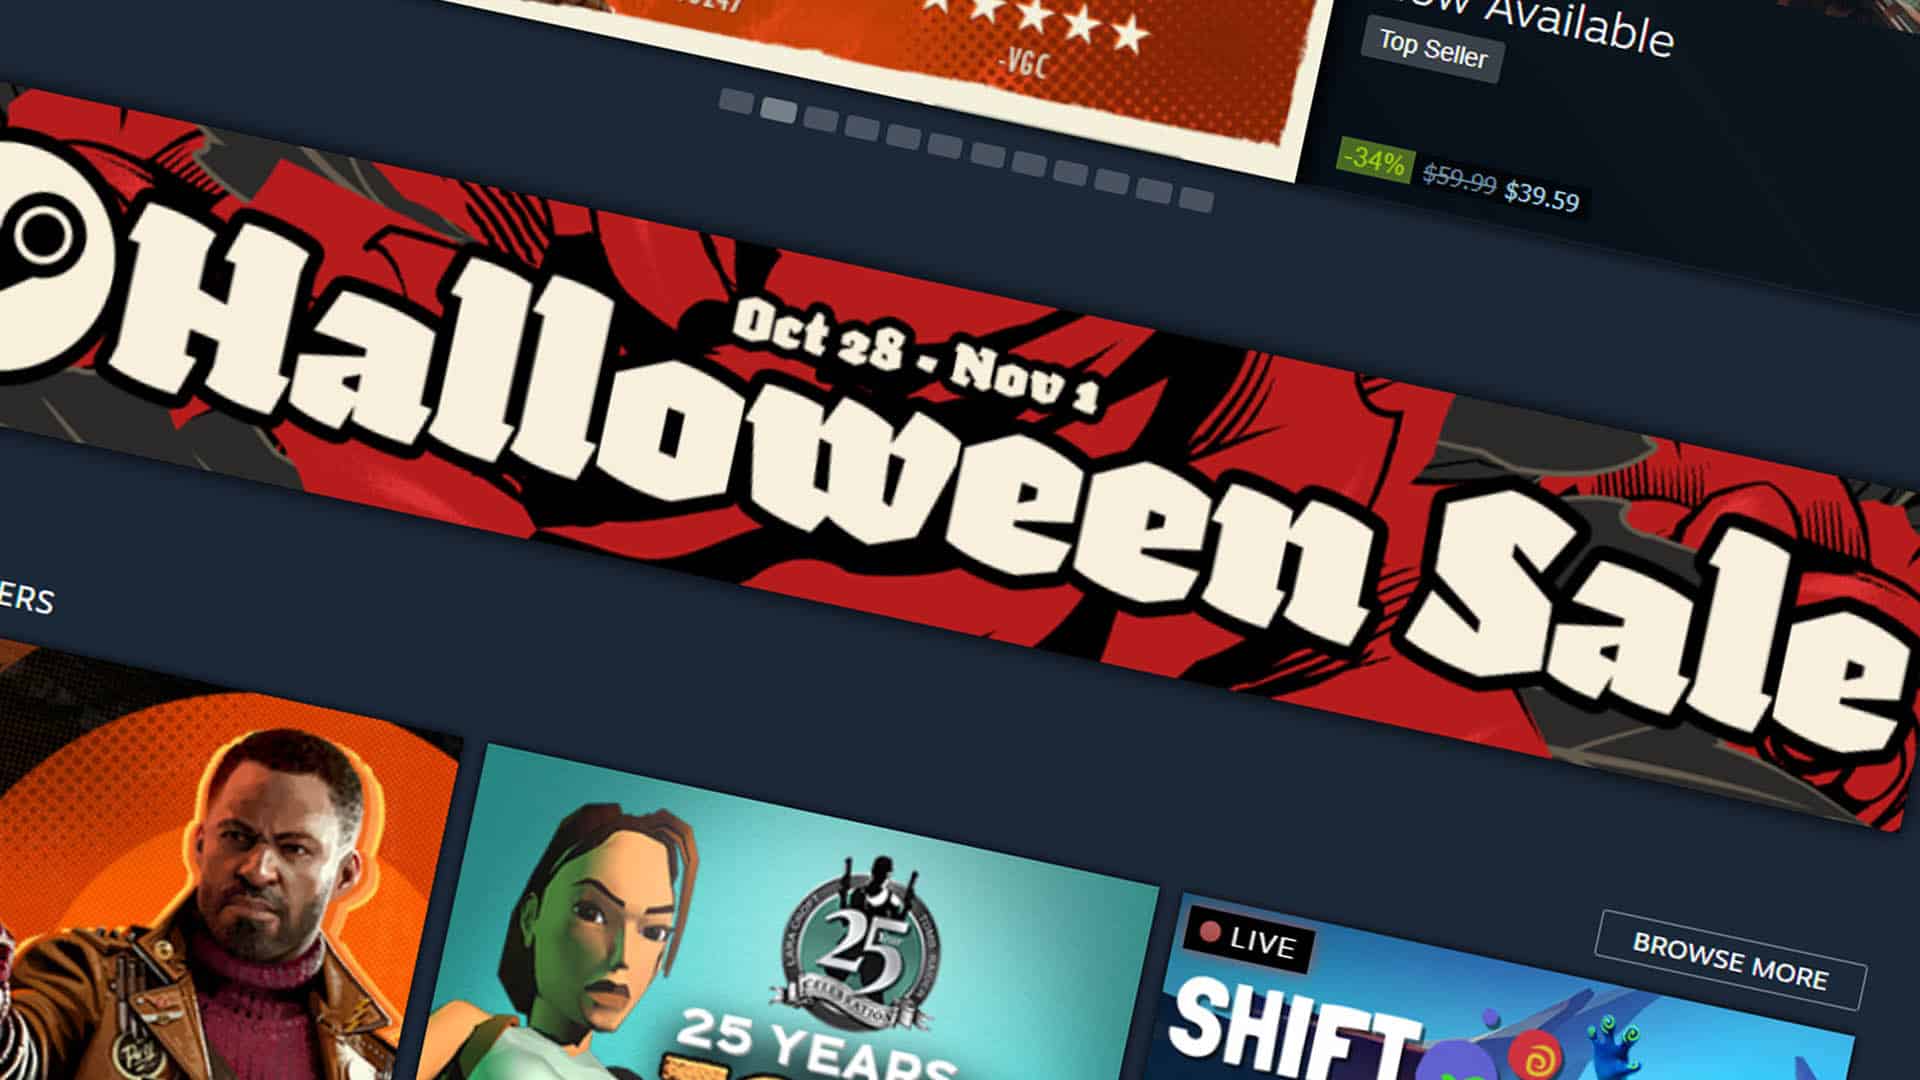 steam store page hallowwen sale red and black banner with game images below it